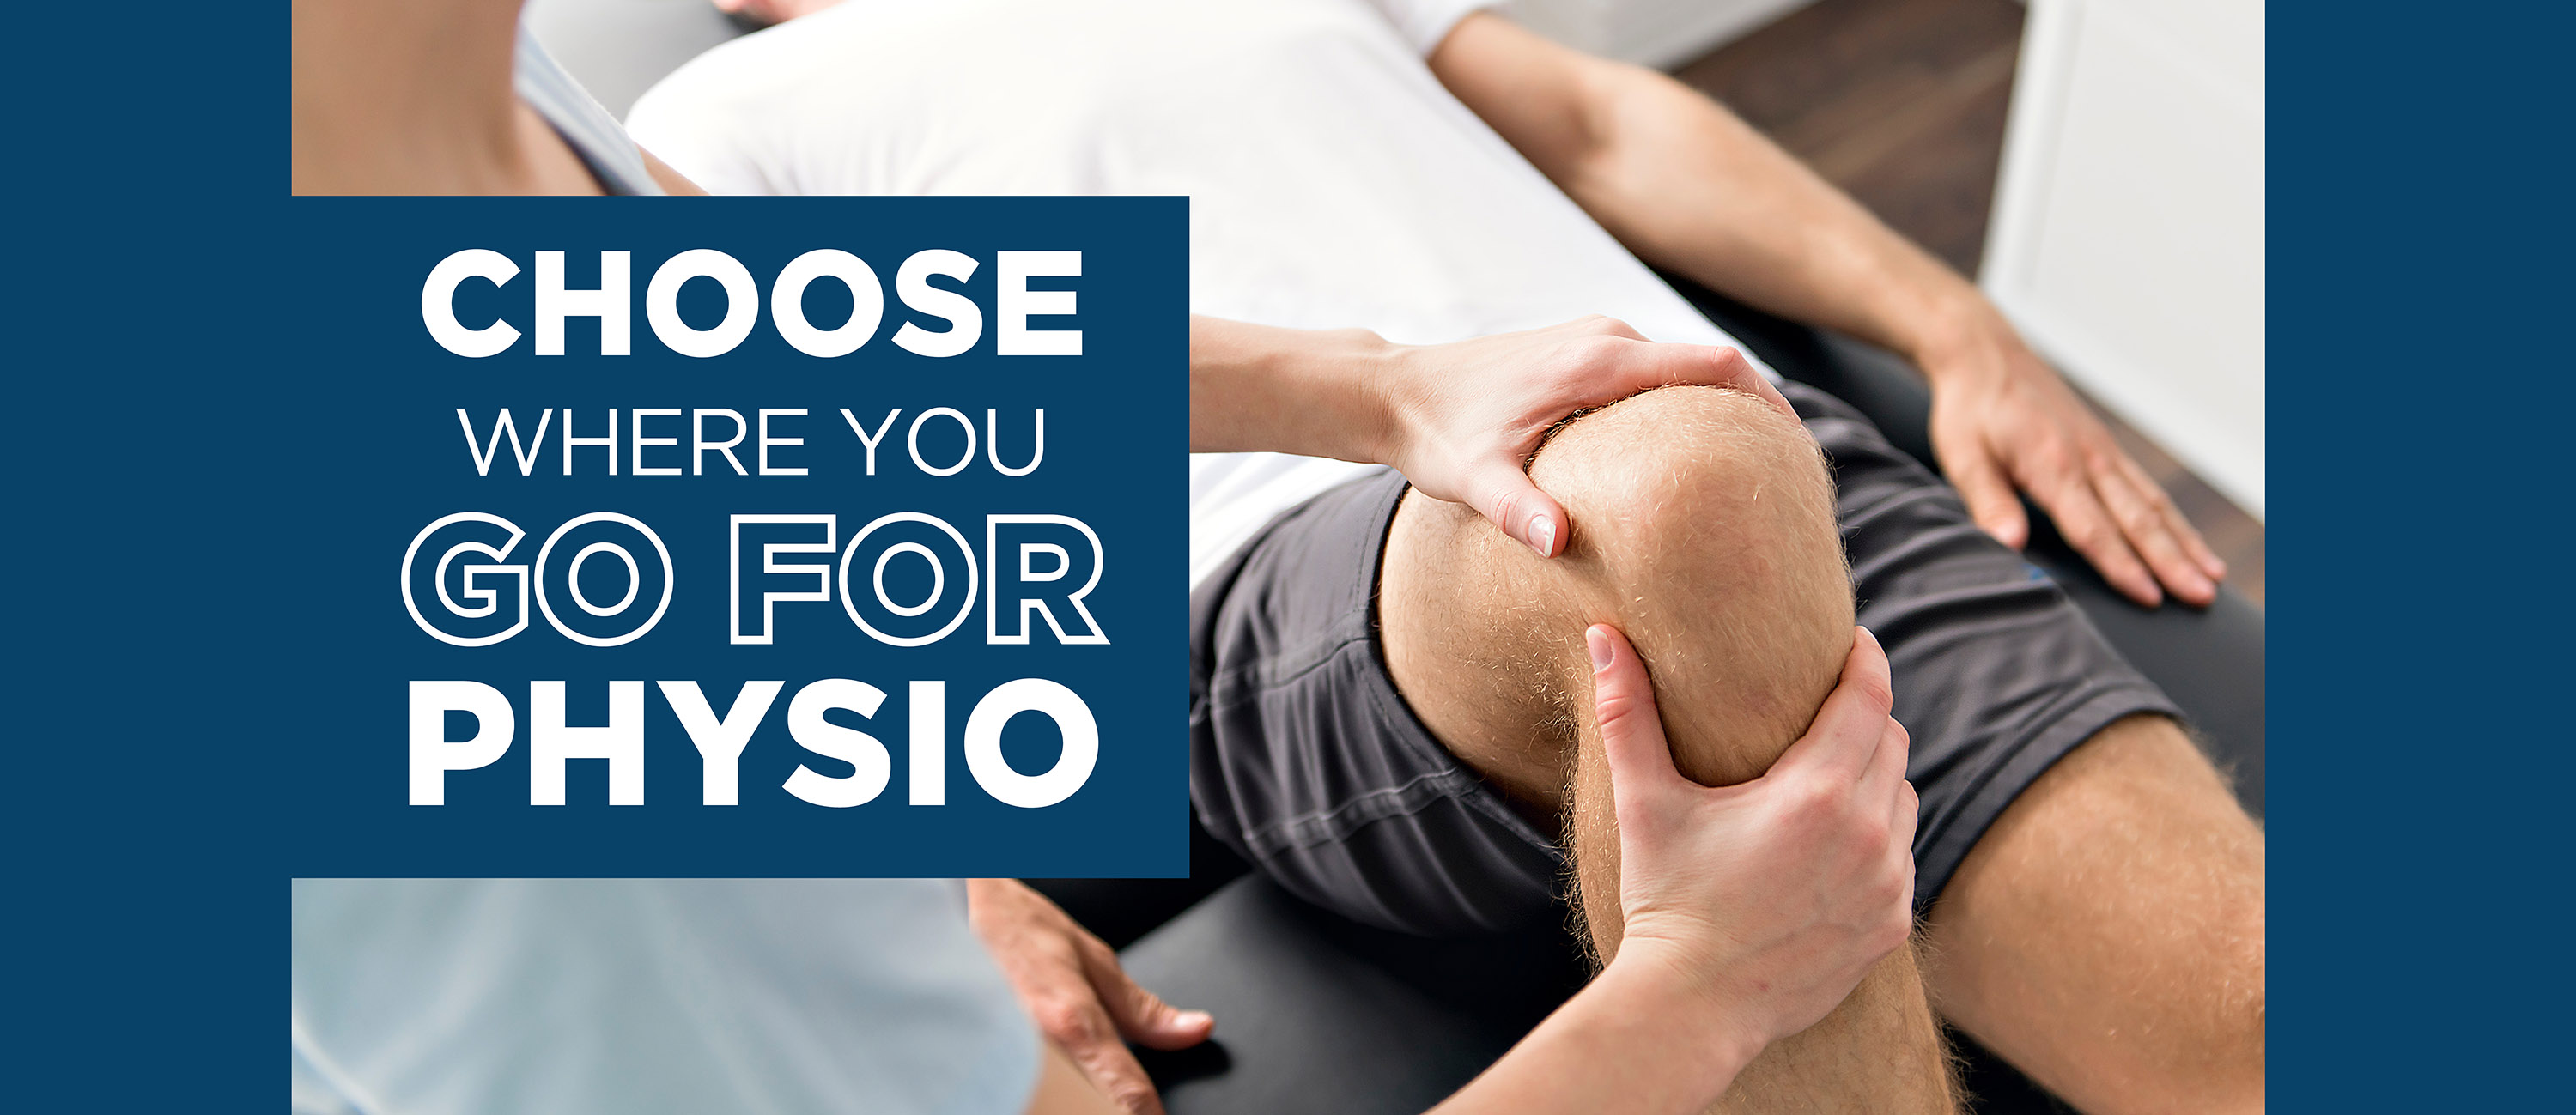 Choose Where You Go For Physio